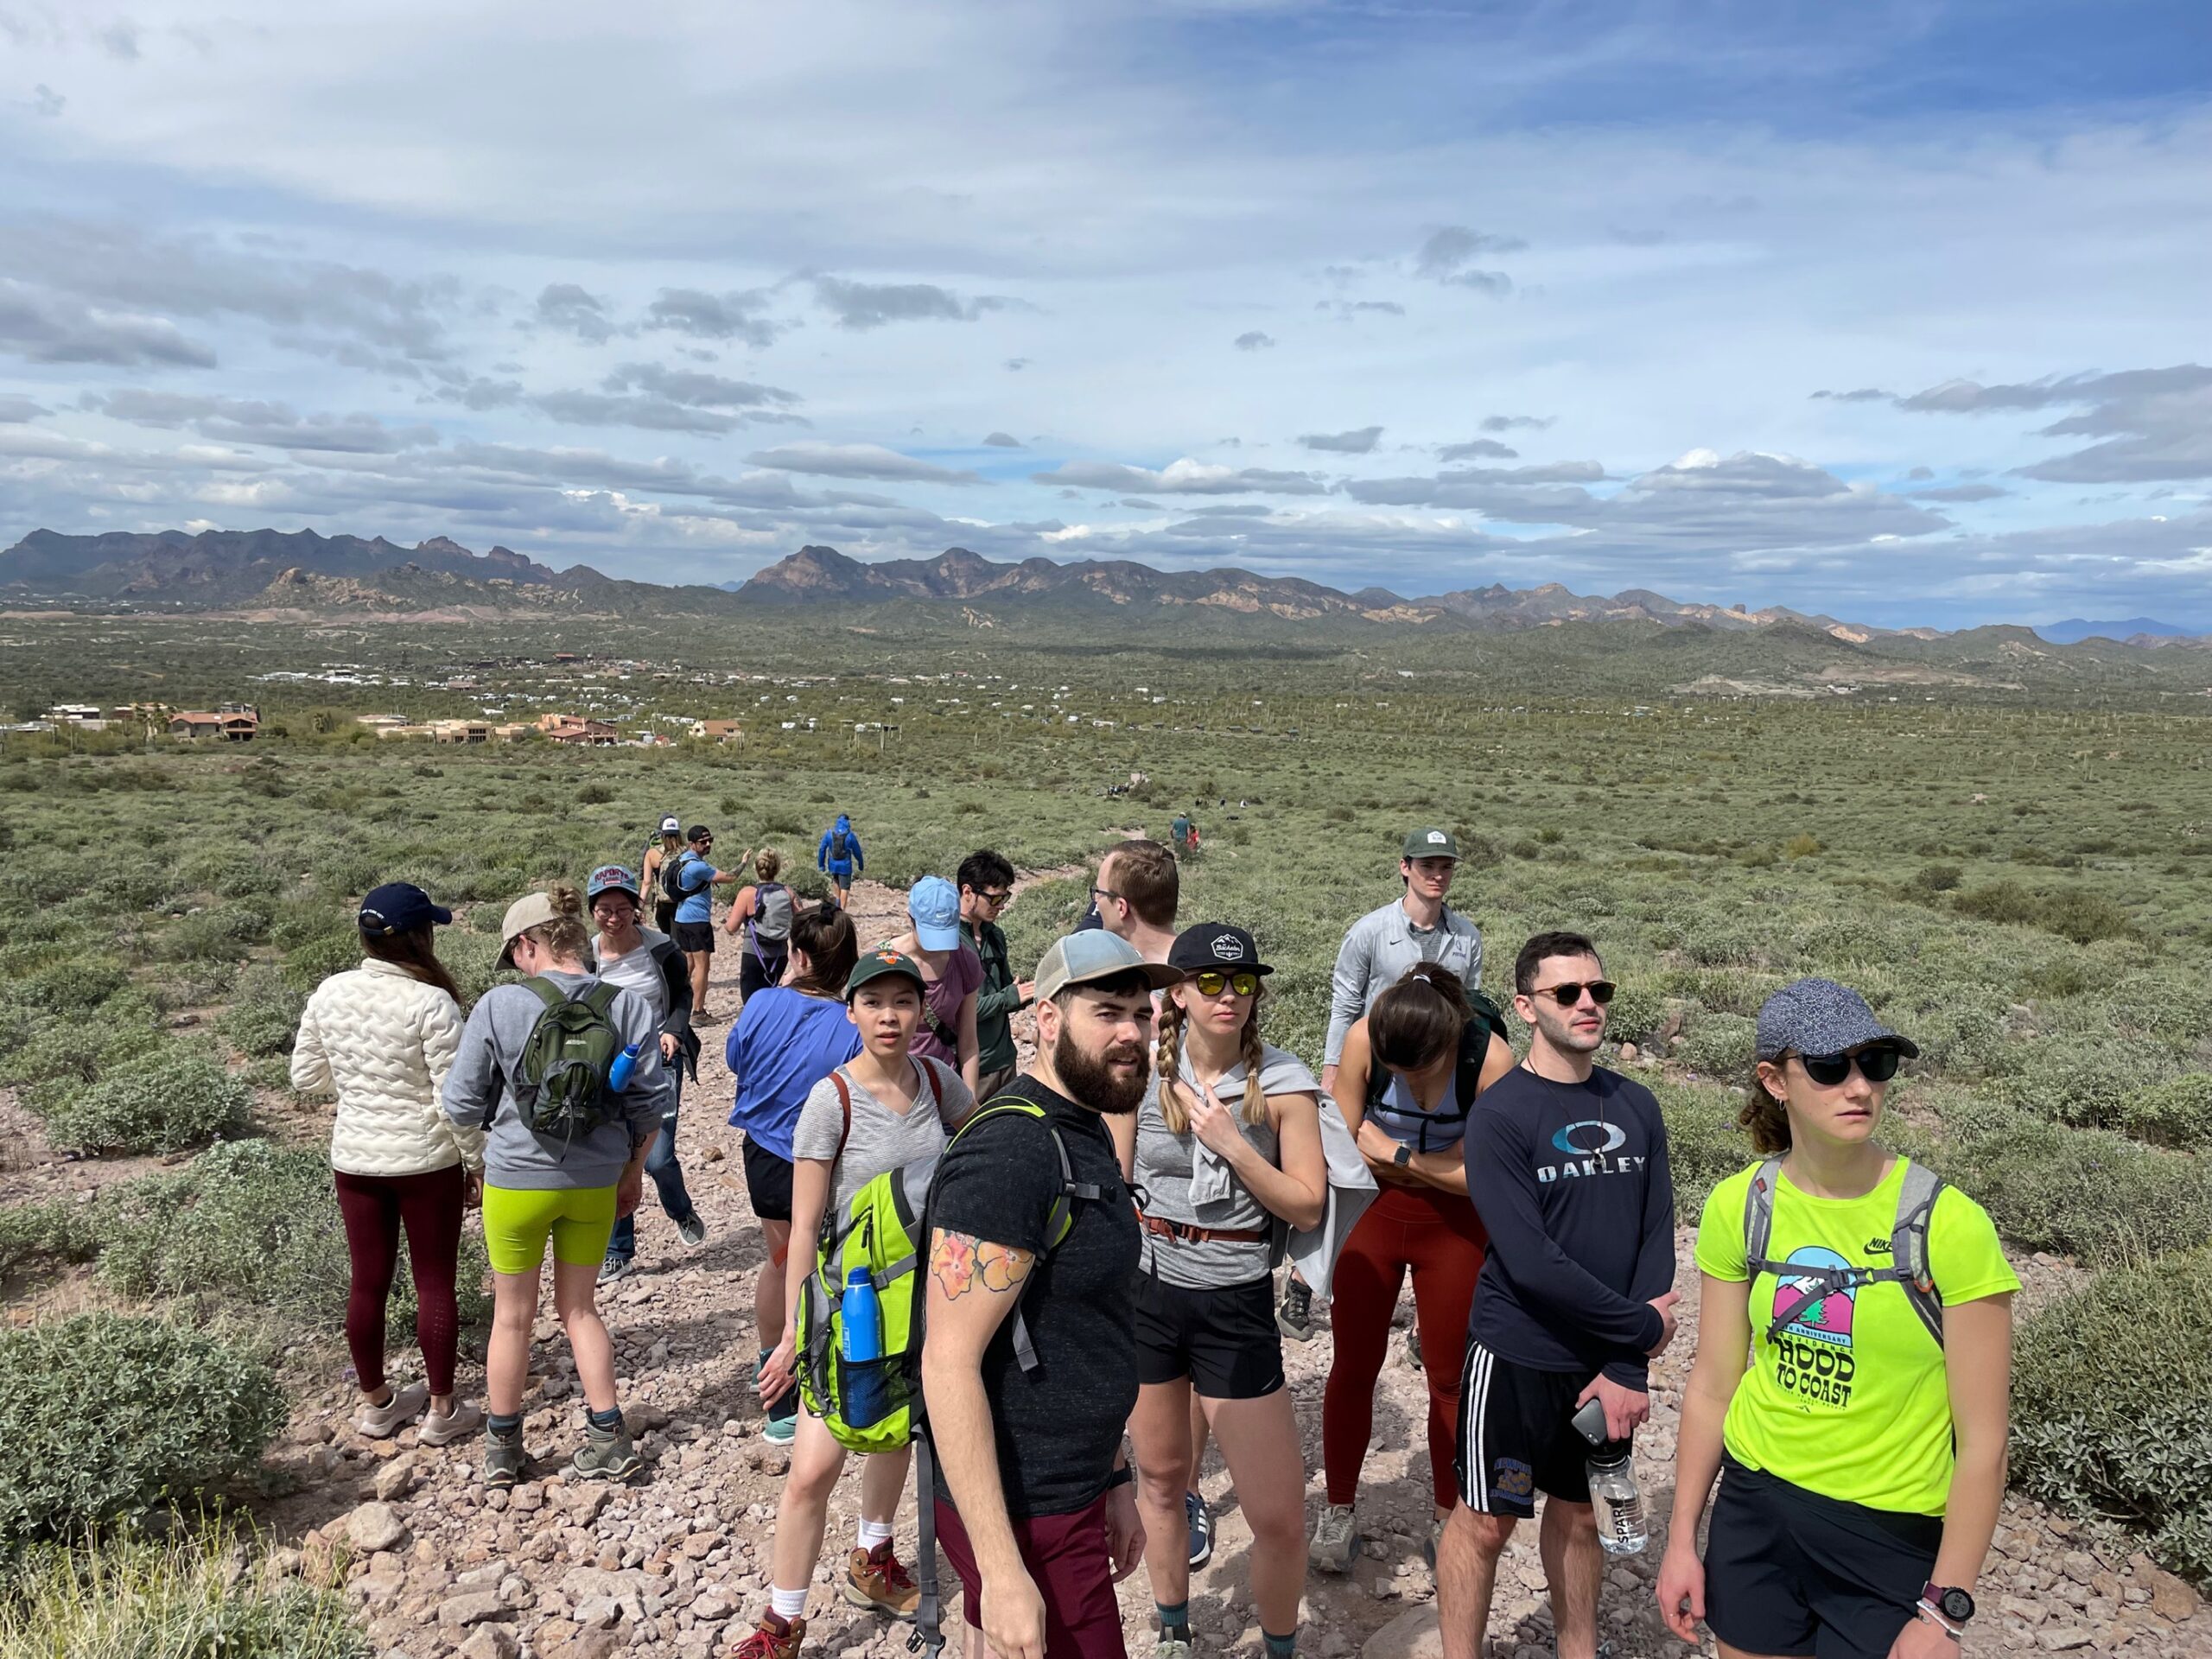 Group of people on a hike in the Arizona desert.